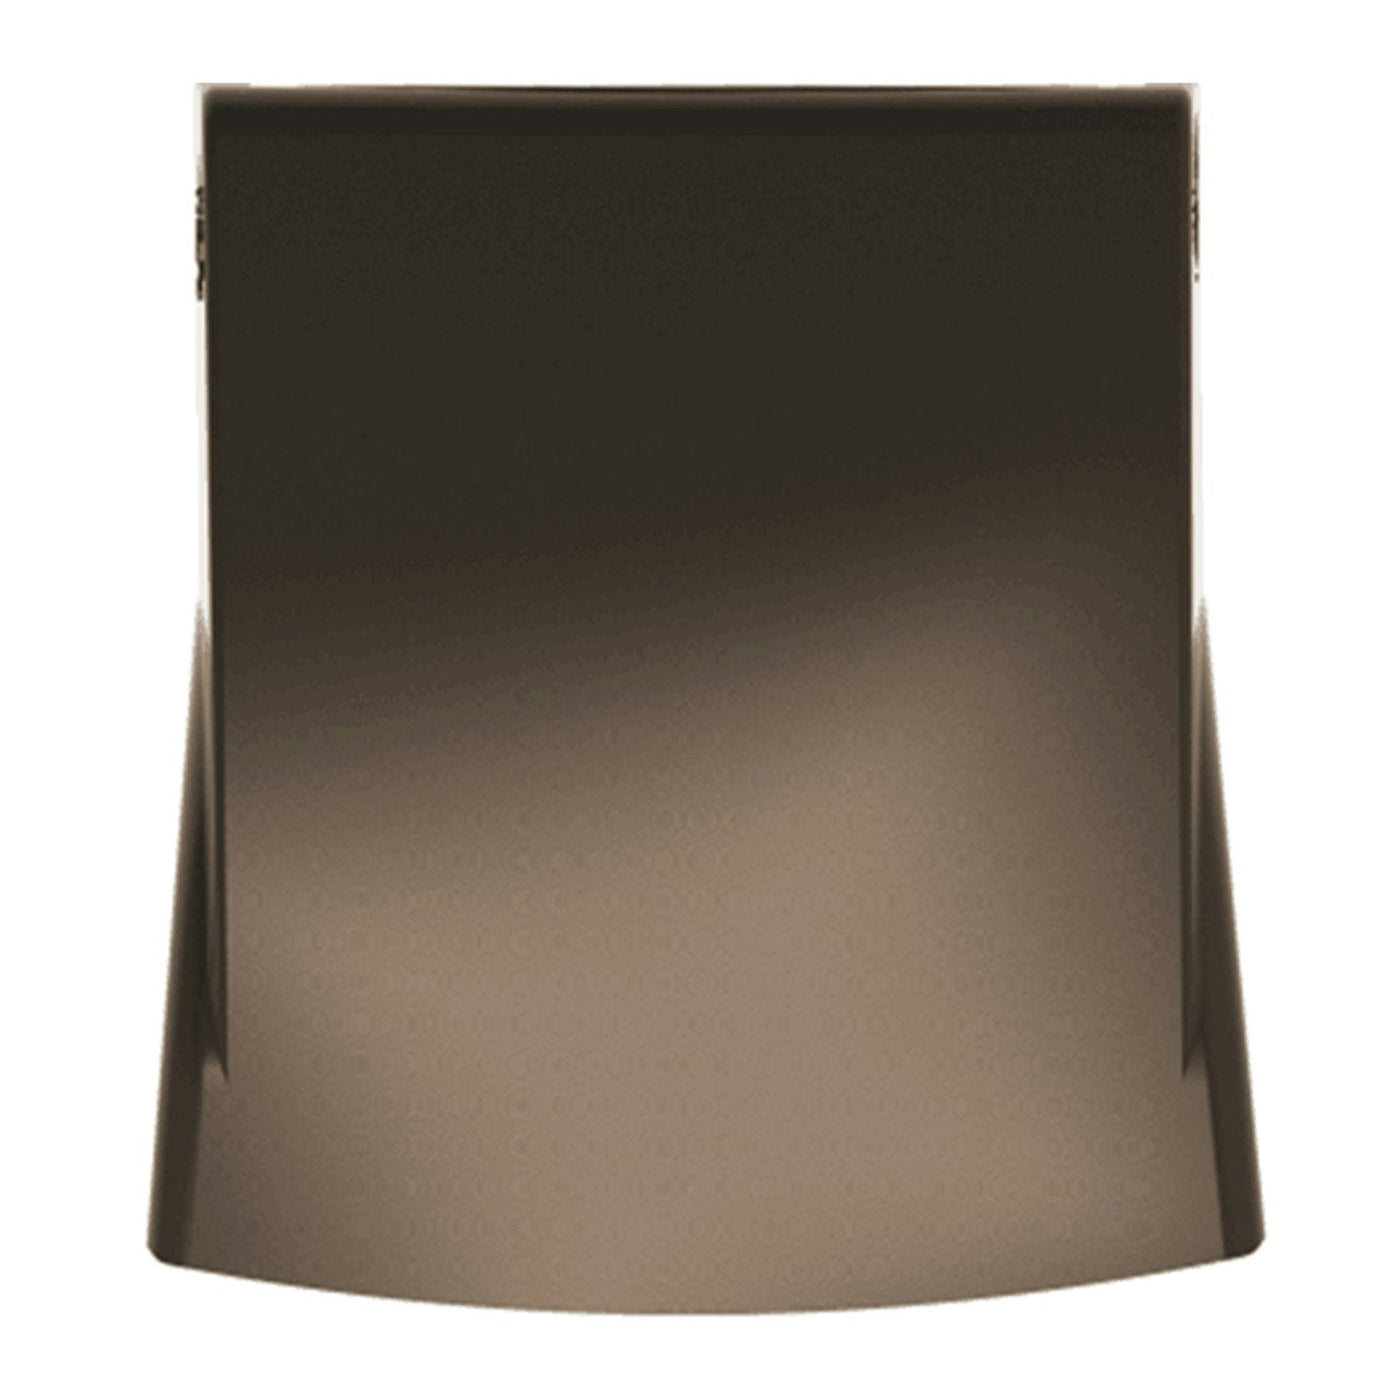 LED Full Cutoff Adjustable Wall Pack, 7250 Lumen Max, Wattage and CCT Selectable, 120-277V, Bronze, Black, or White Finish